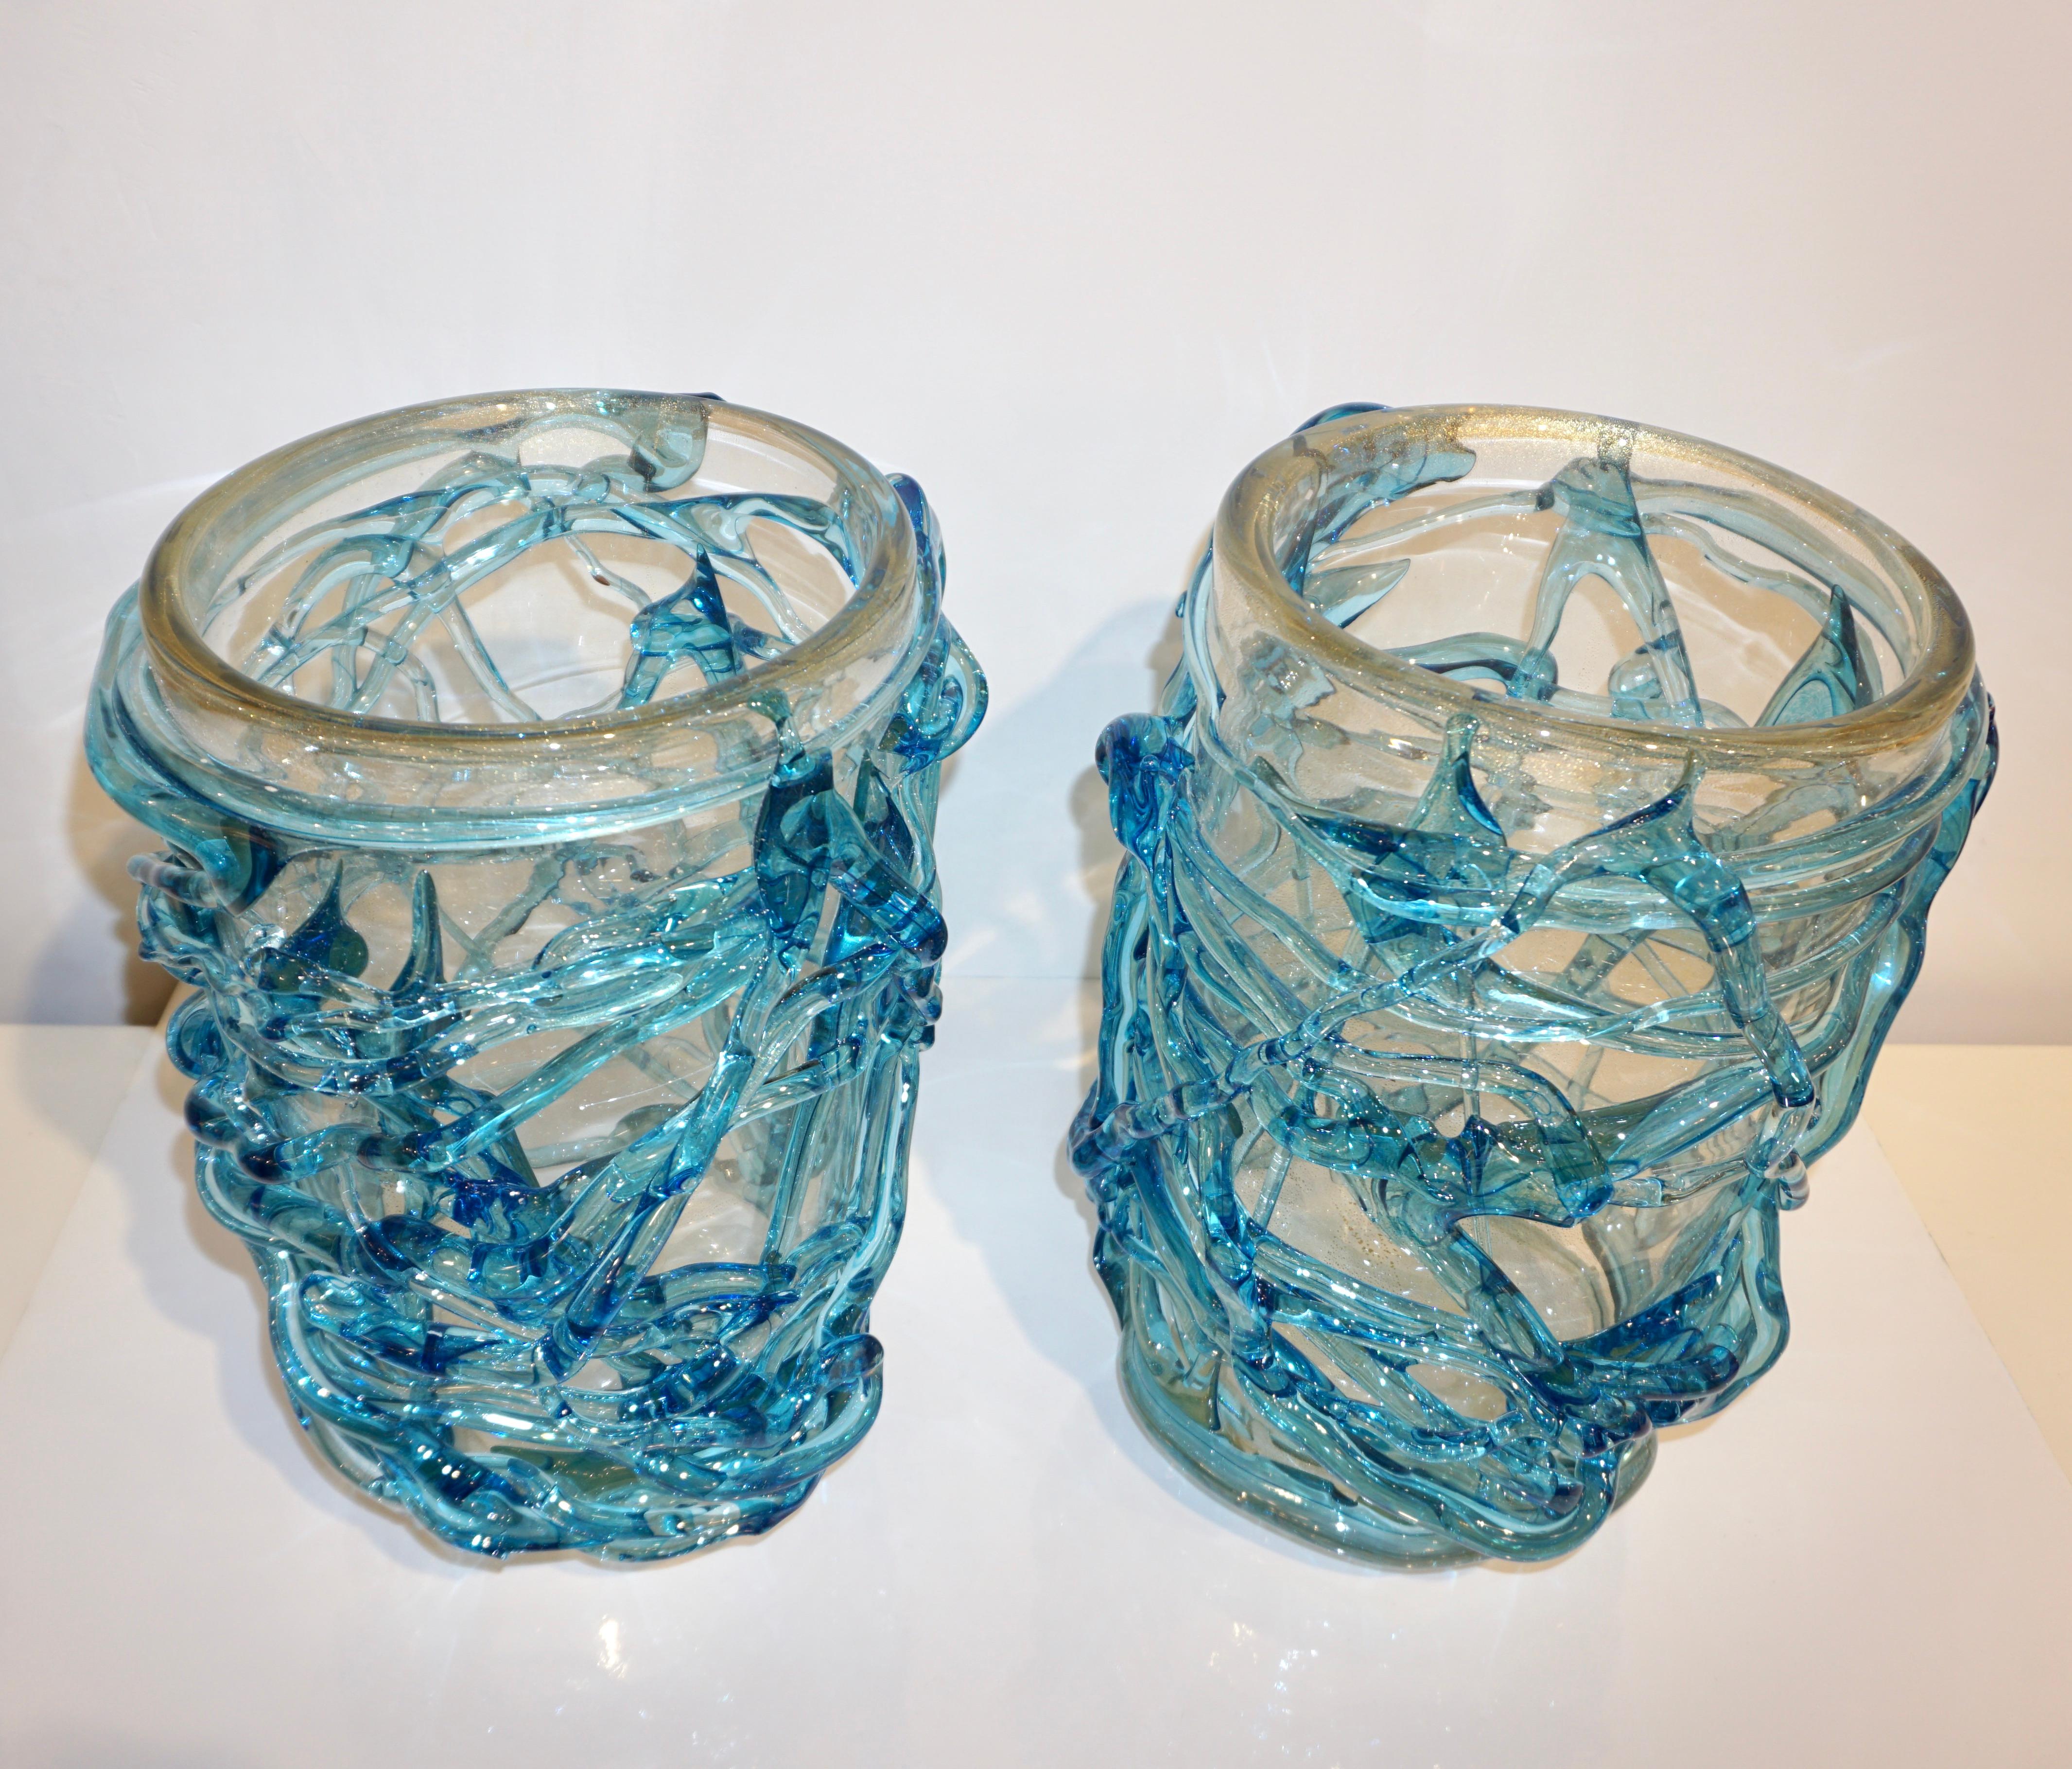 Early 21st century, stunning Venetian pair of high-quality Murano glass sculpture vases, the crystal clear blown body is extensively worked with 24 Karat gold dust inclusion, decorated with an elaborate expressionist work of raised hand-poured